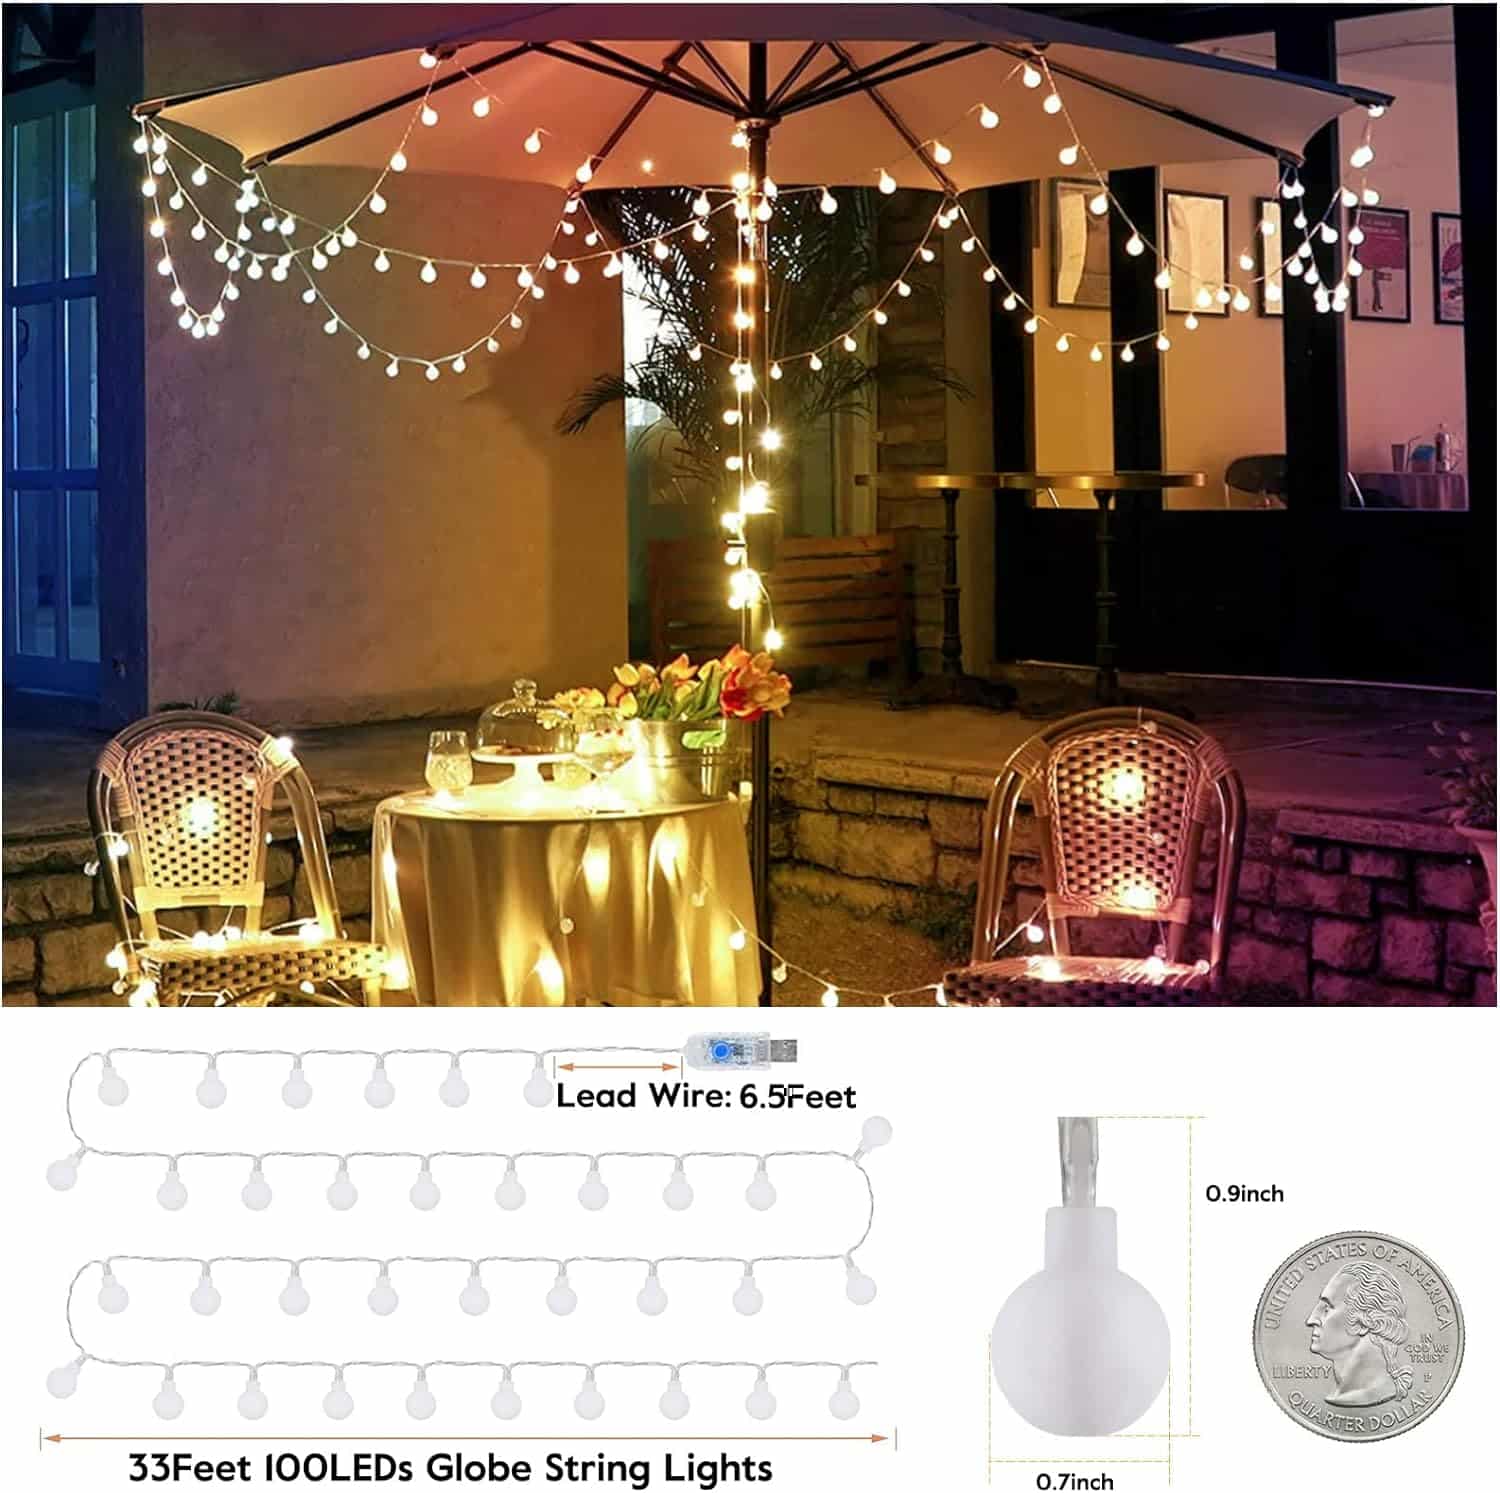 Minetom Globe String Lights, 33 Feet 100 Led Fairy Lights Plug in, 8 Modes with Remote Mini Globe Lights for Indoor Outdoor Bedroom Party Wedding Garden Christmas Tree Decor, Warm White